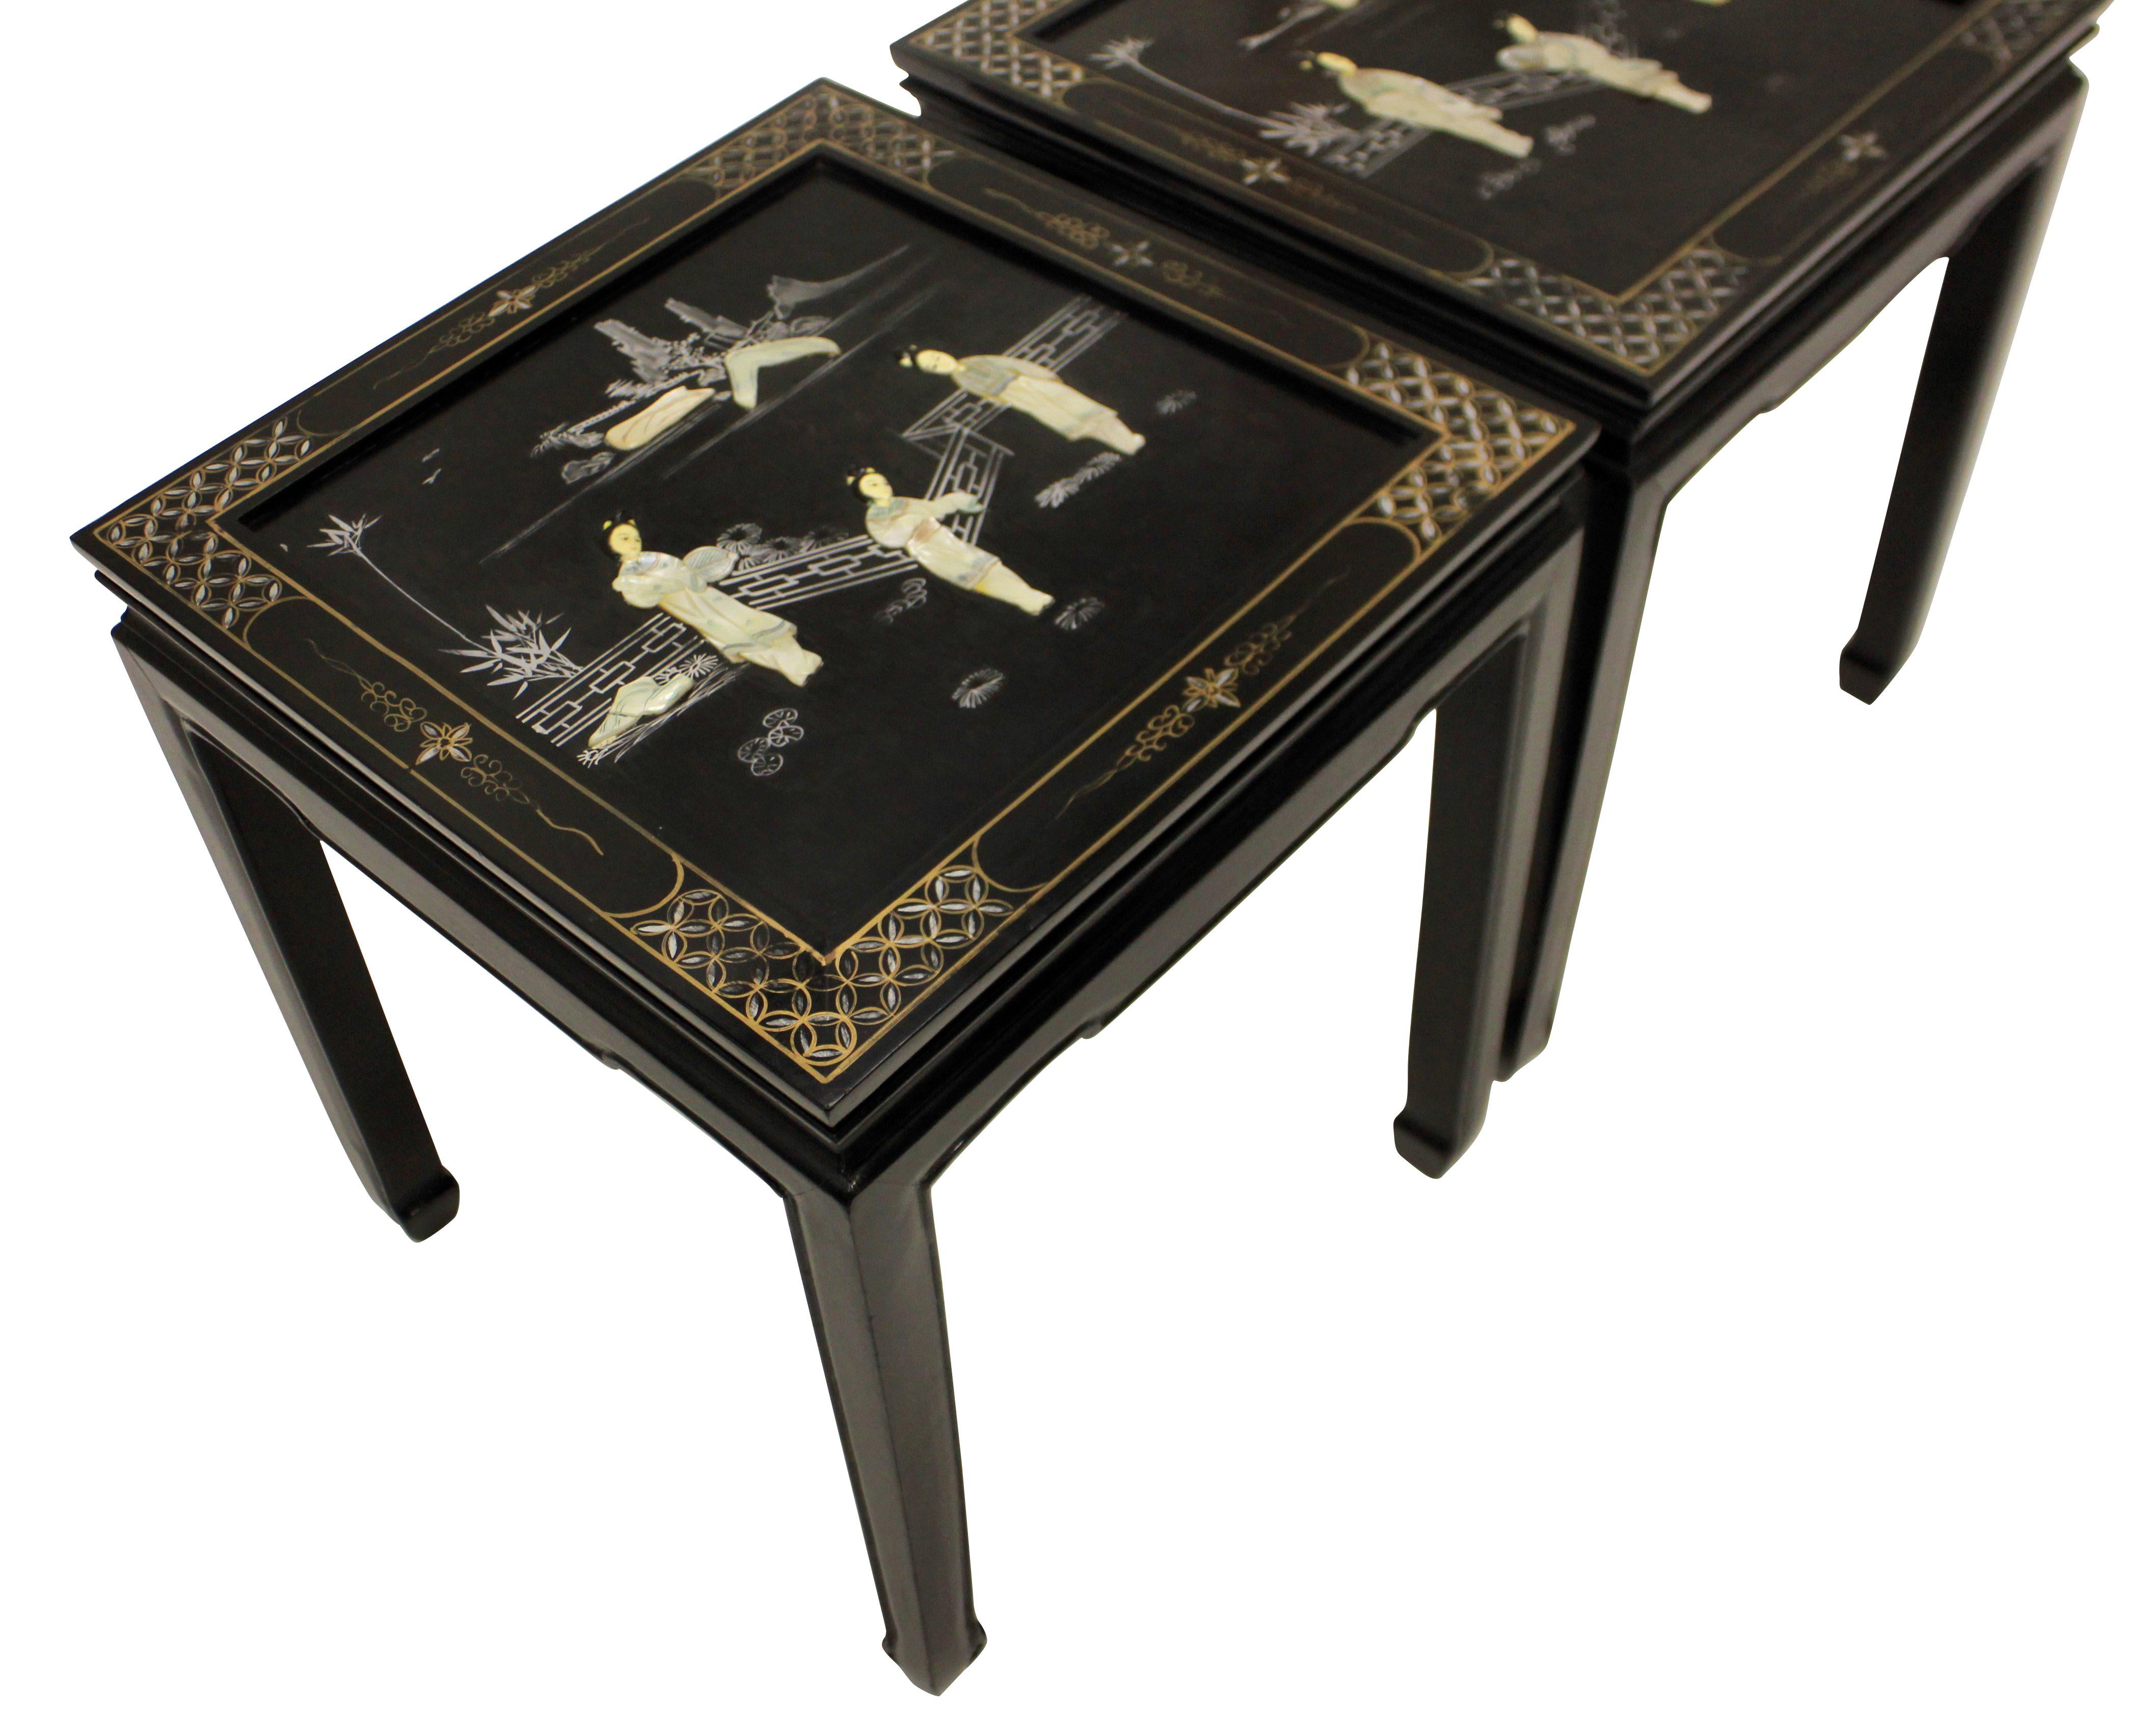 A pair of French Japanned side tables in black lacquer with ivory and mother of pearl detail.